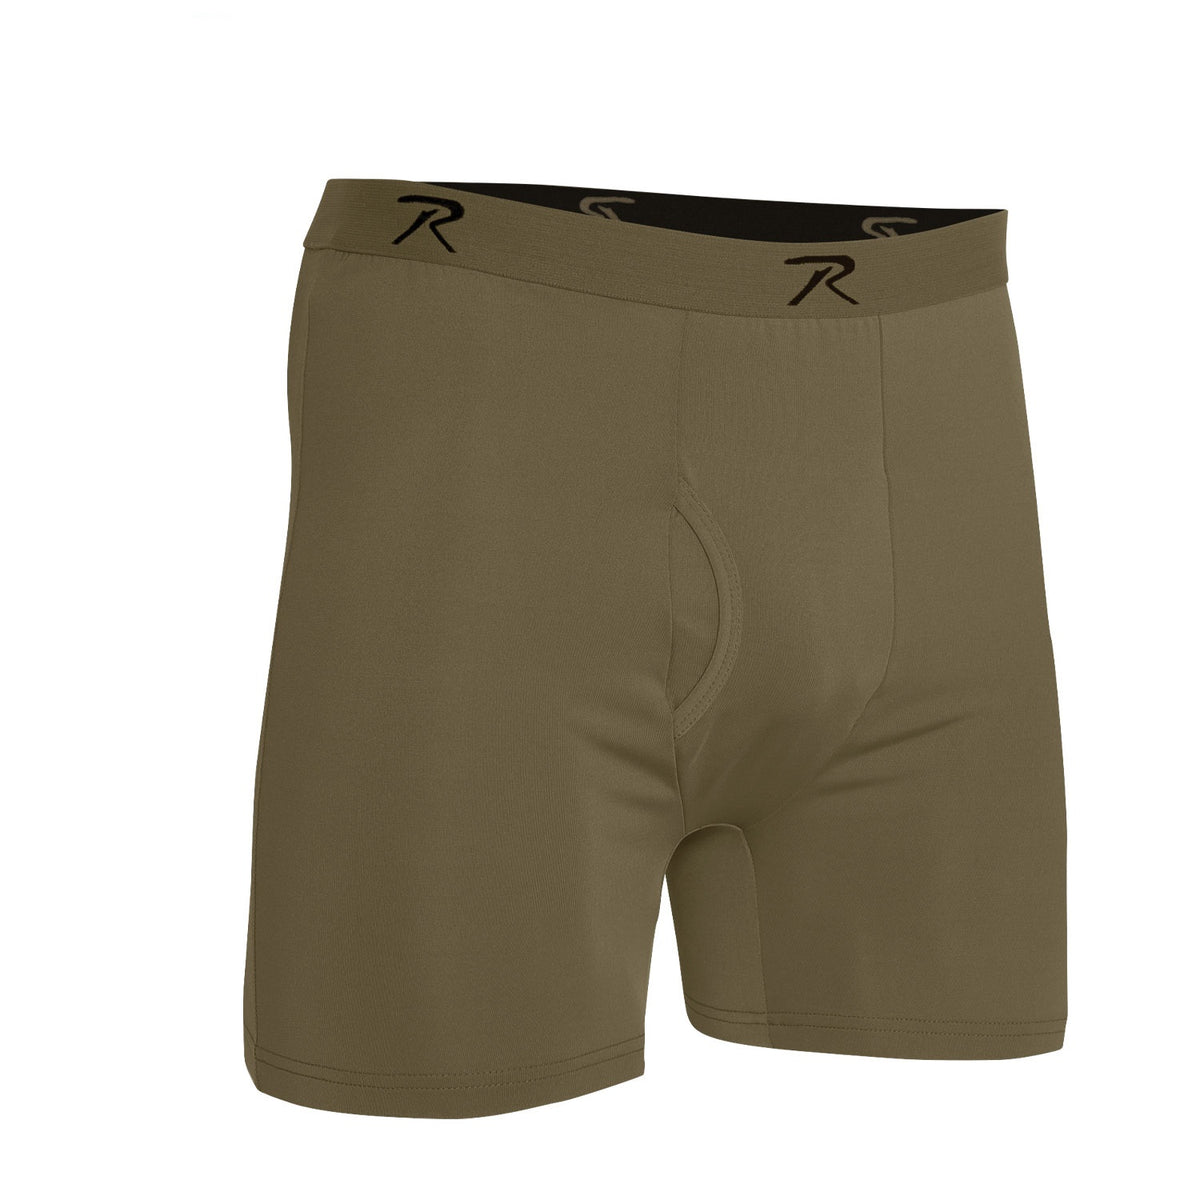 Rothco AR 670-1 Coyote Brown Moisture Wicking Performance Boxer Shorts